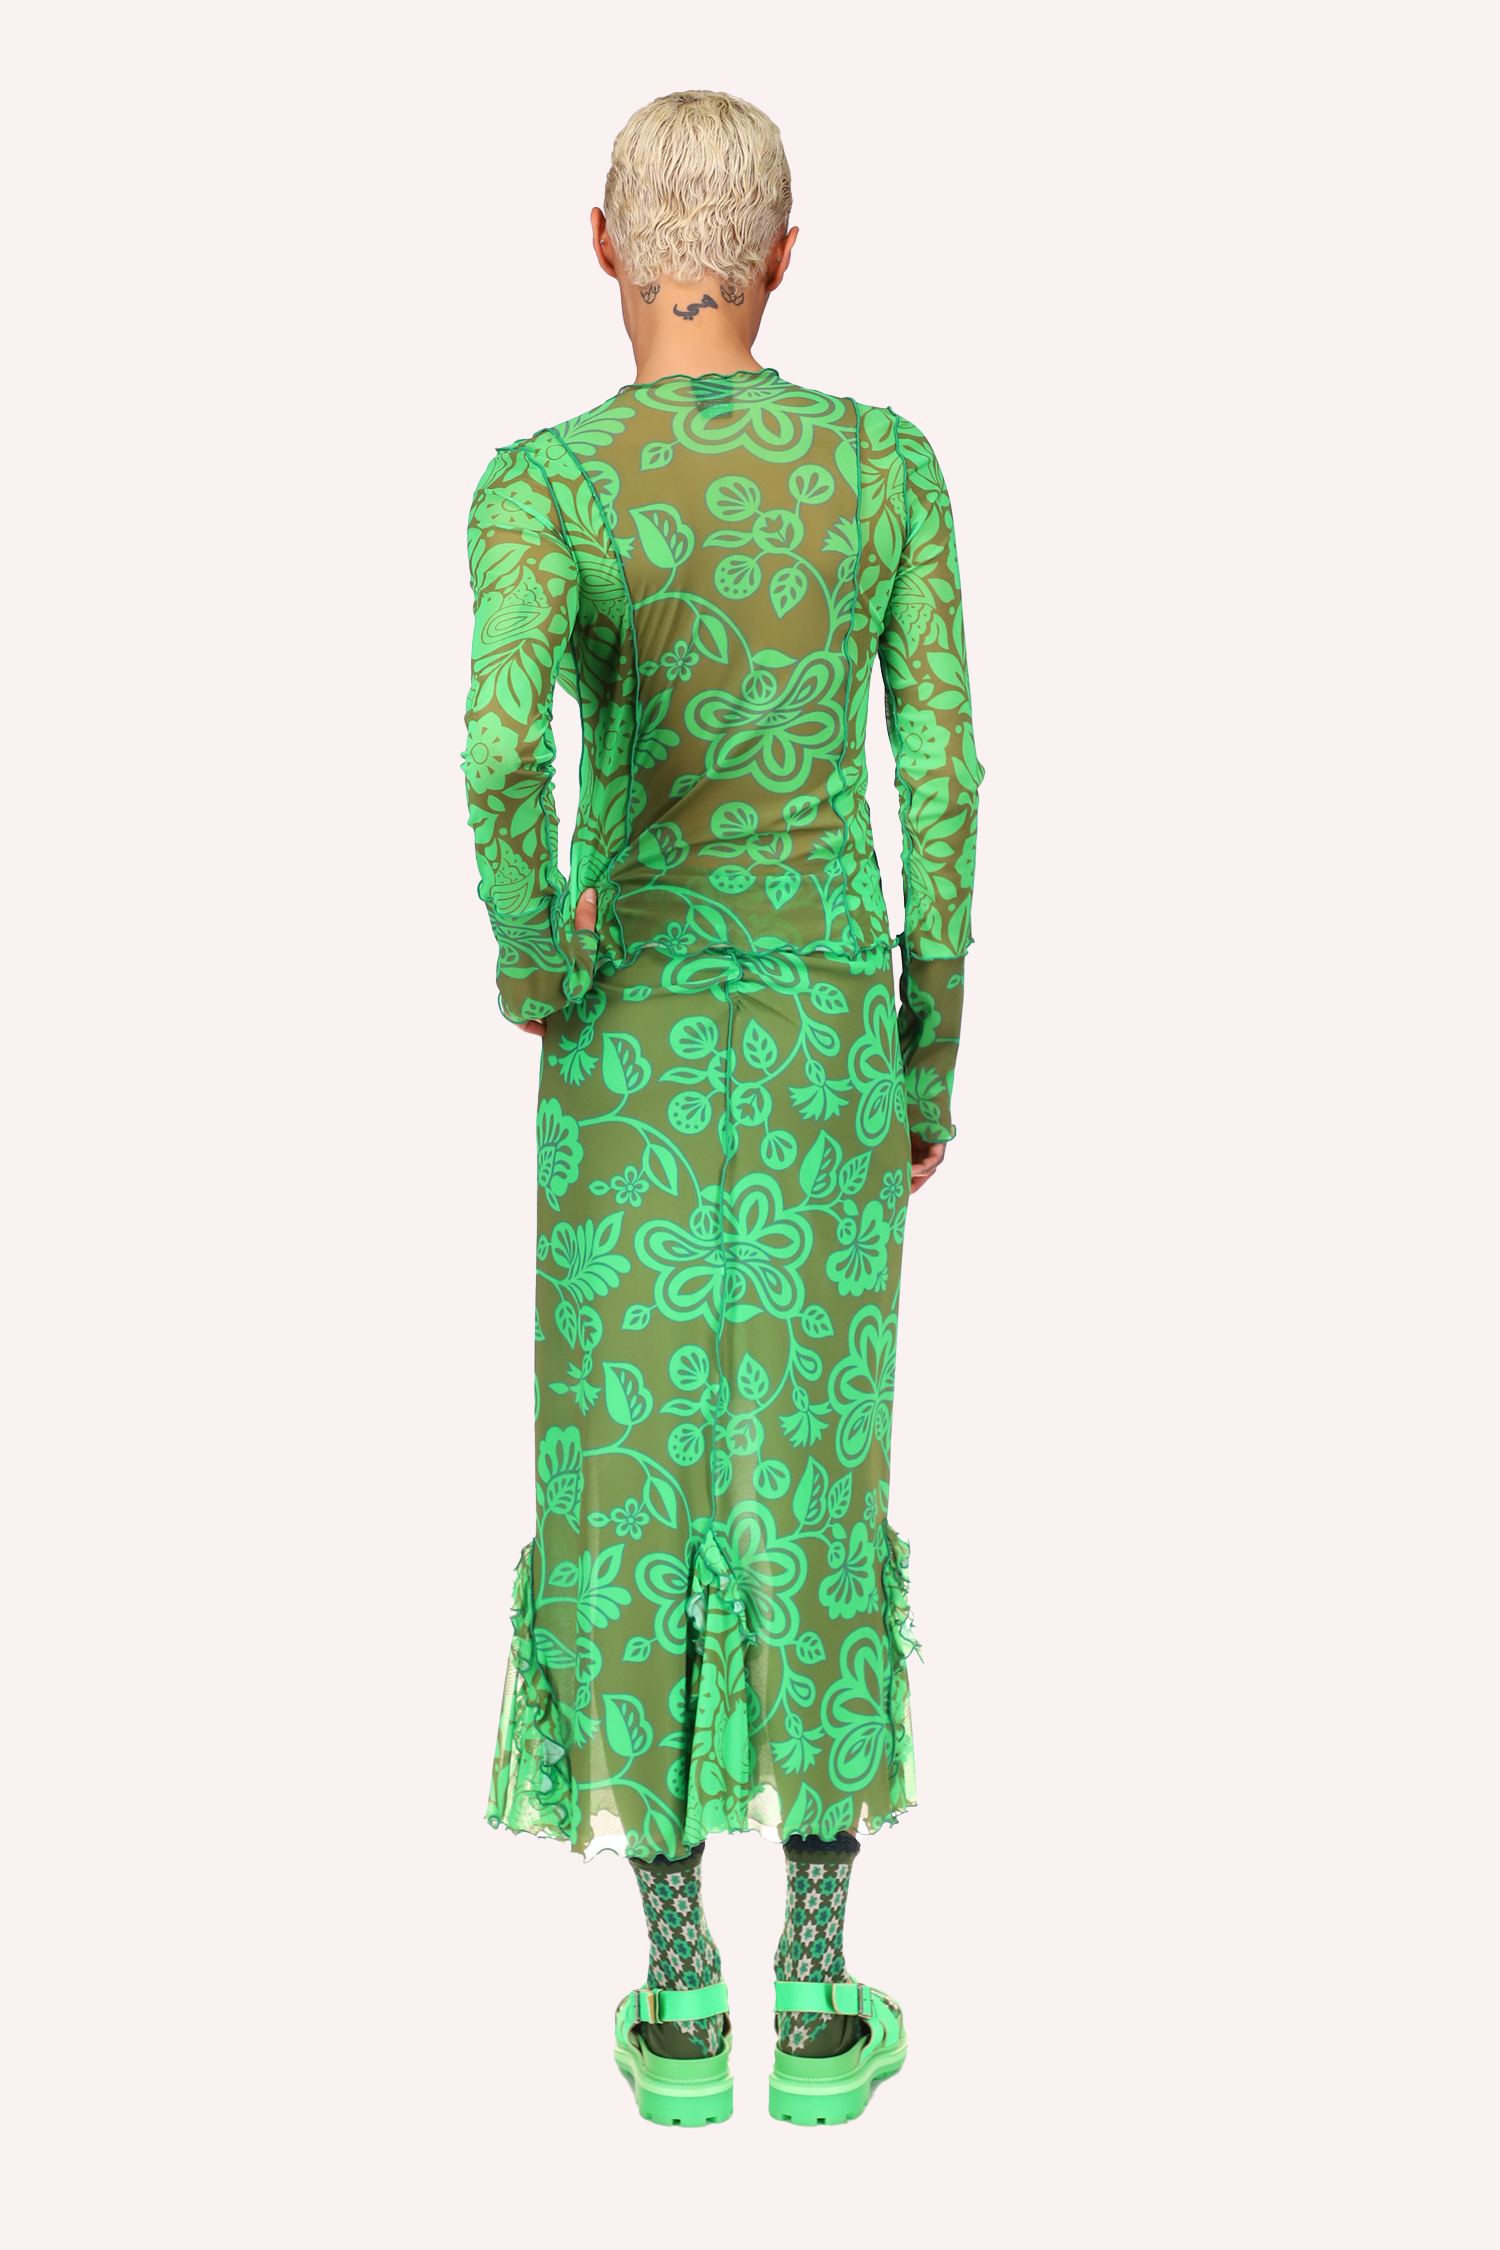 Long green stiches on the back and green ruffle at bottom, ankles long